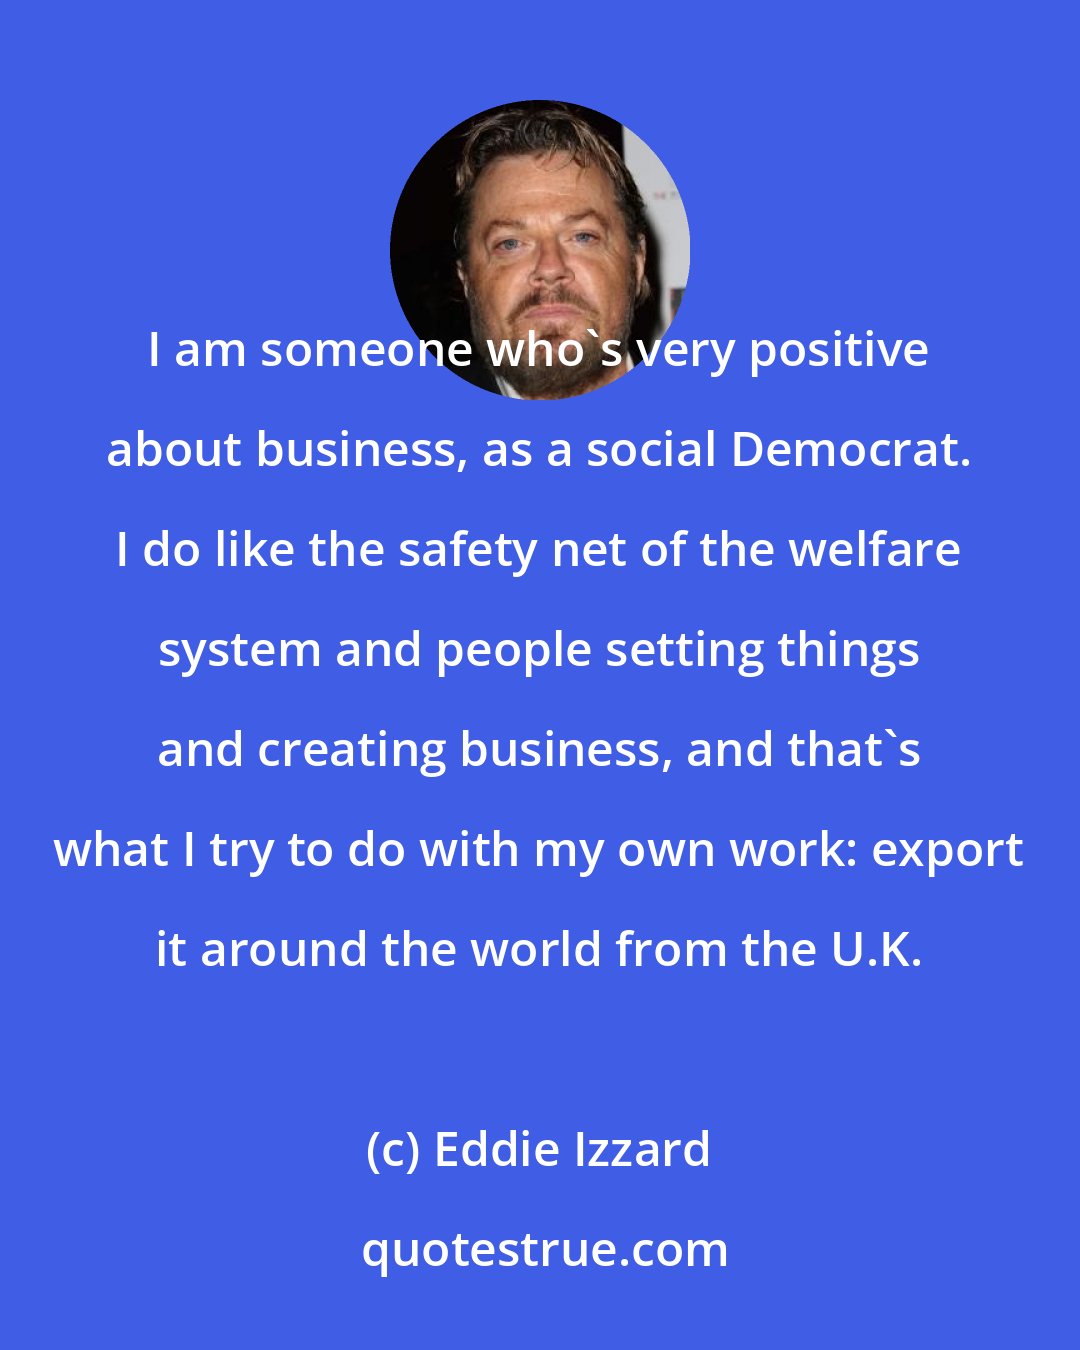 Eddie Izzard: I am someone who's very positive about business, as a social Democrat. I do like the safety net of the welfare system and people setting things and creating business, and that's what I try to do with my own work: export it around the world from the U.K.